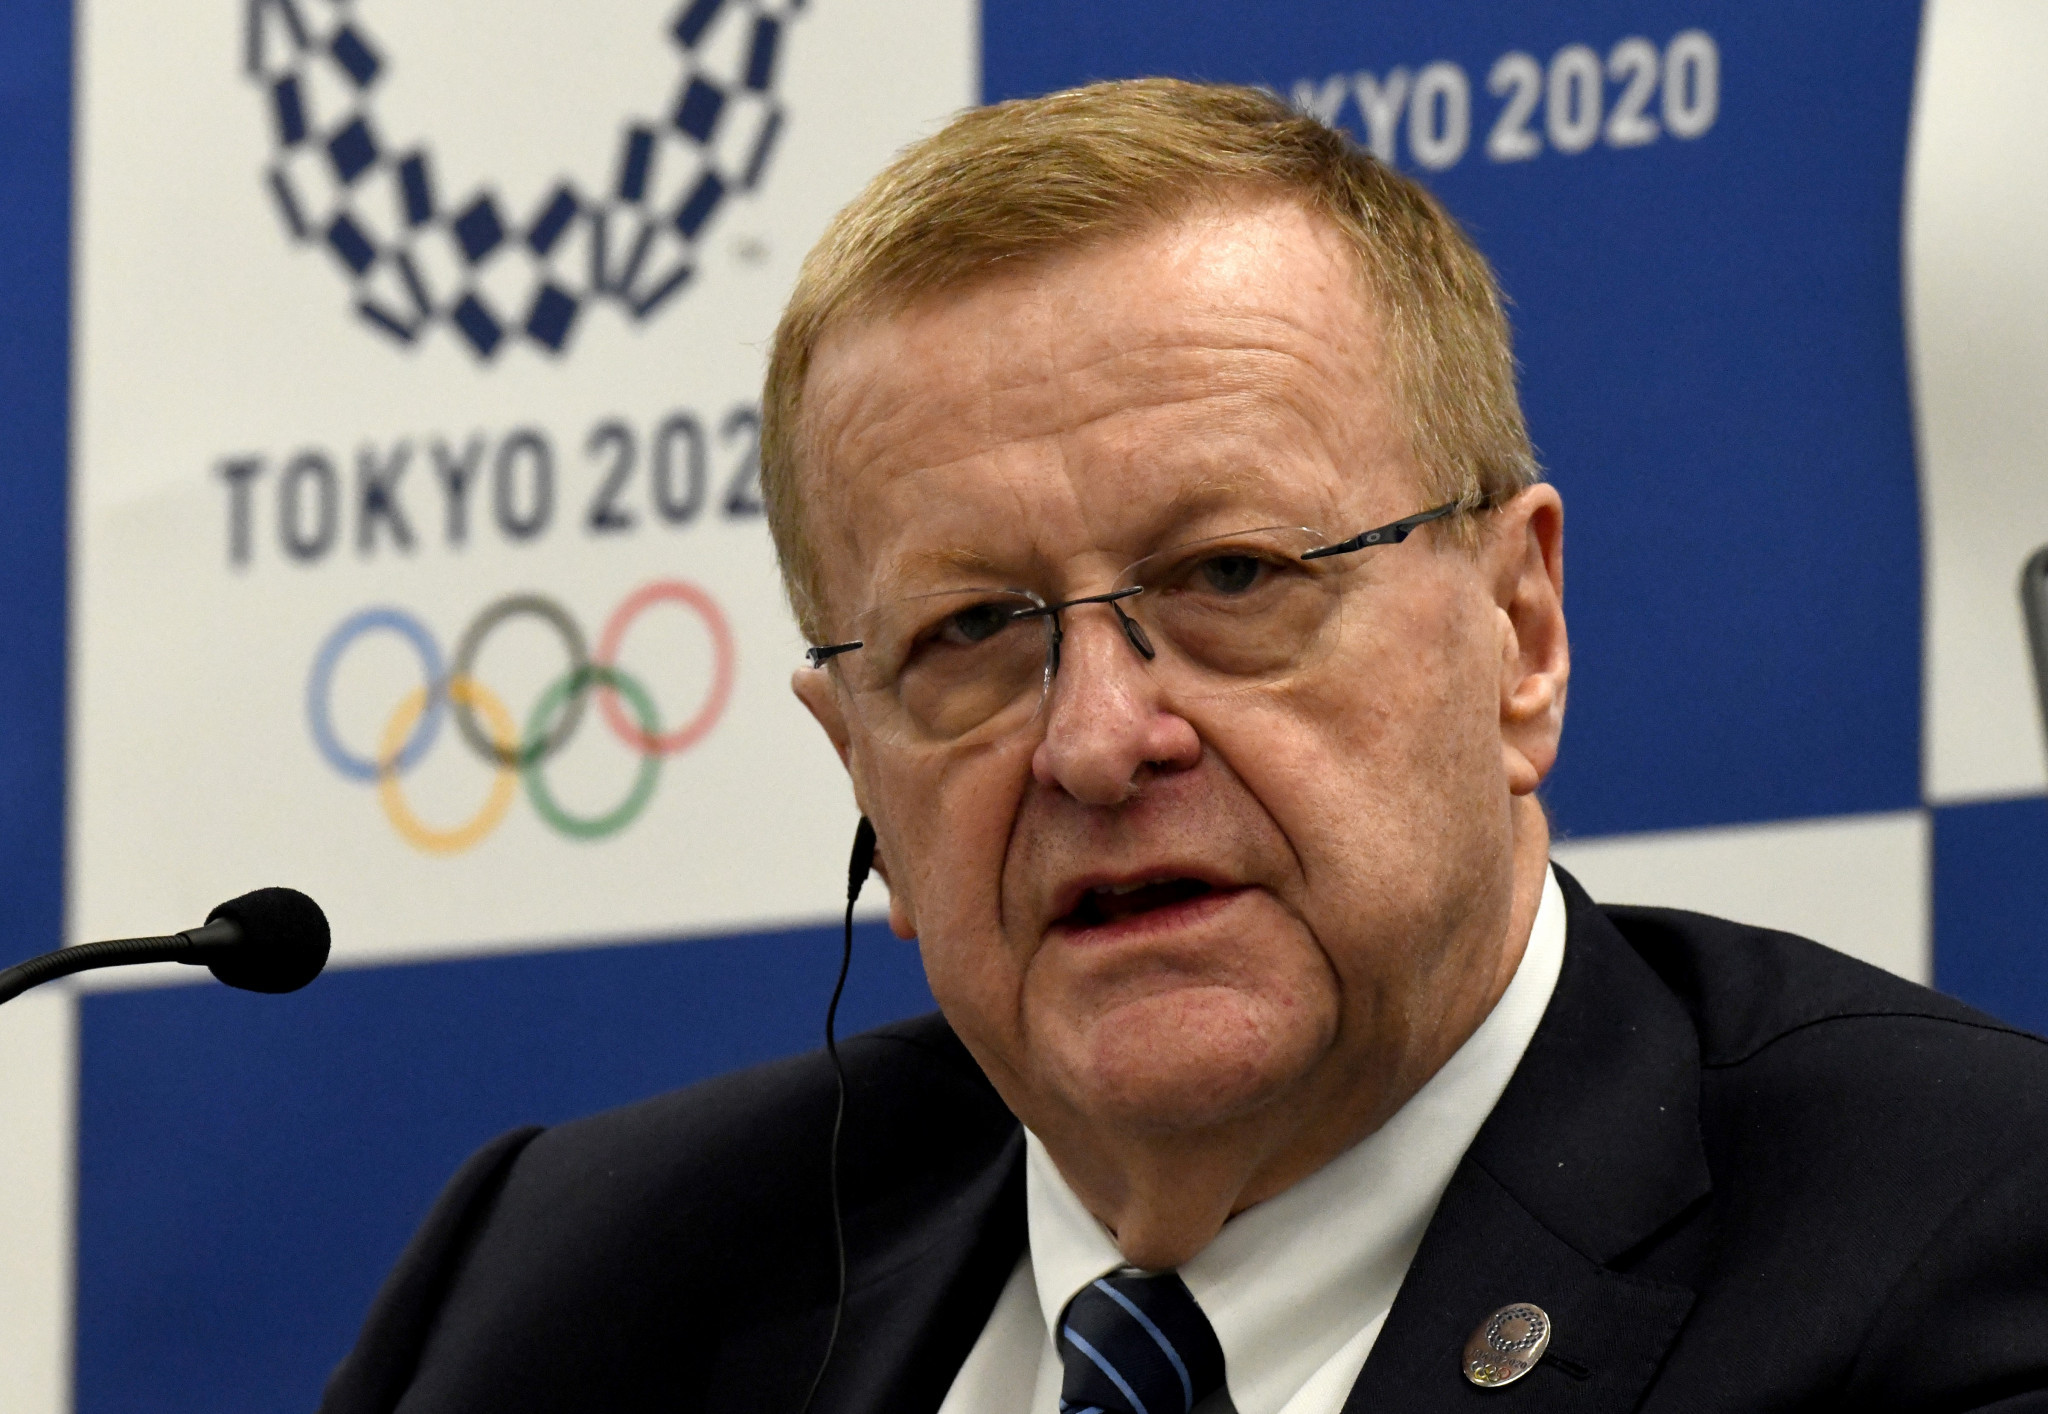 IOC confident in venue construction and engagement as Tokyo 2020 seek to finalise revised budget